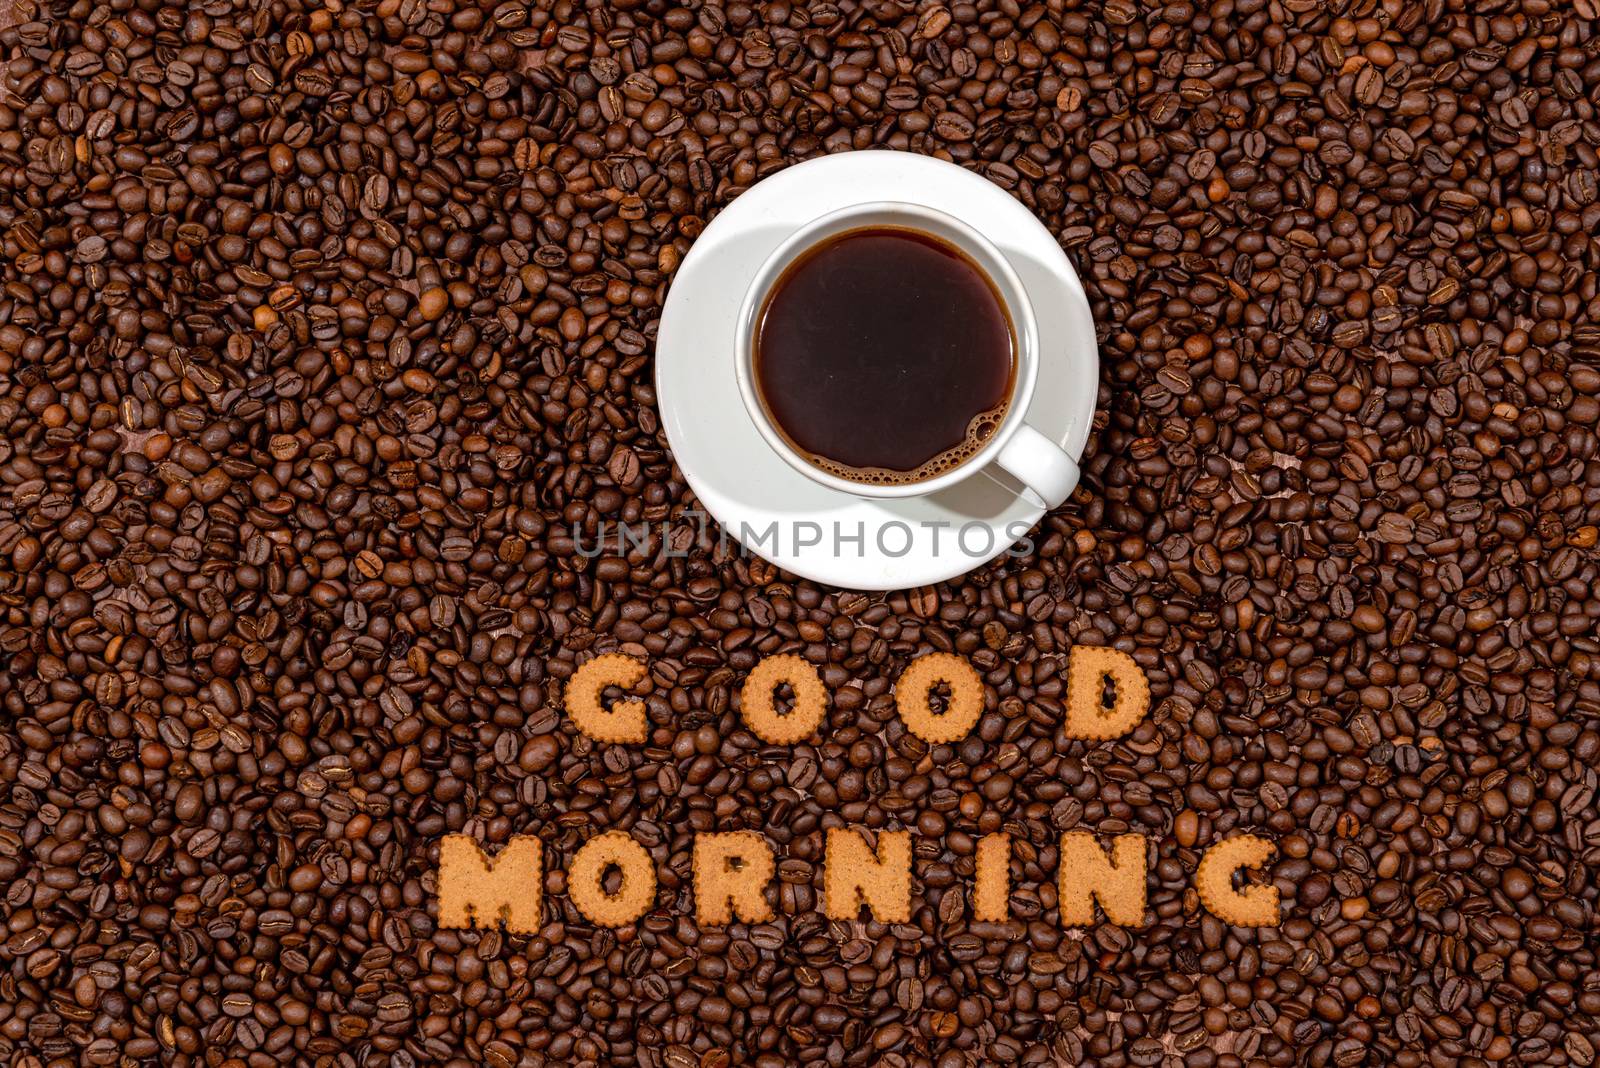 White caffee mug and words GOOD MORNING made from biscuit letters on a dark coffee bean background - image